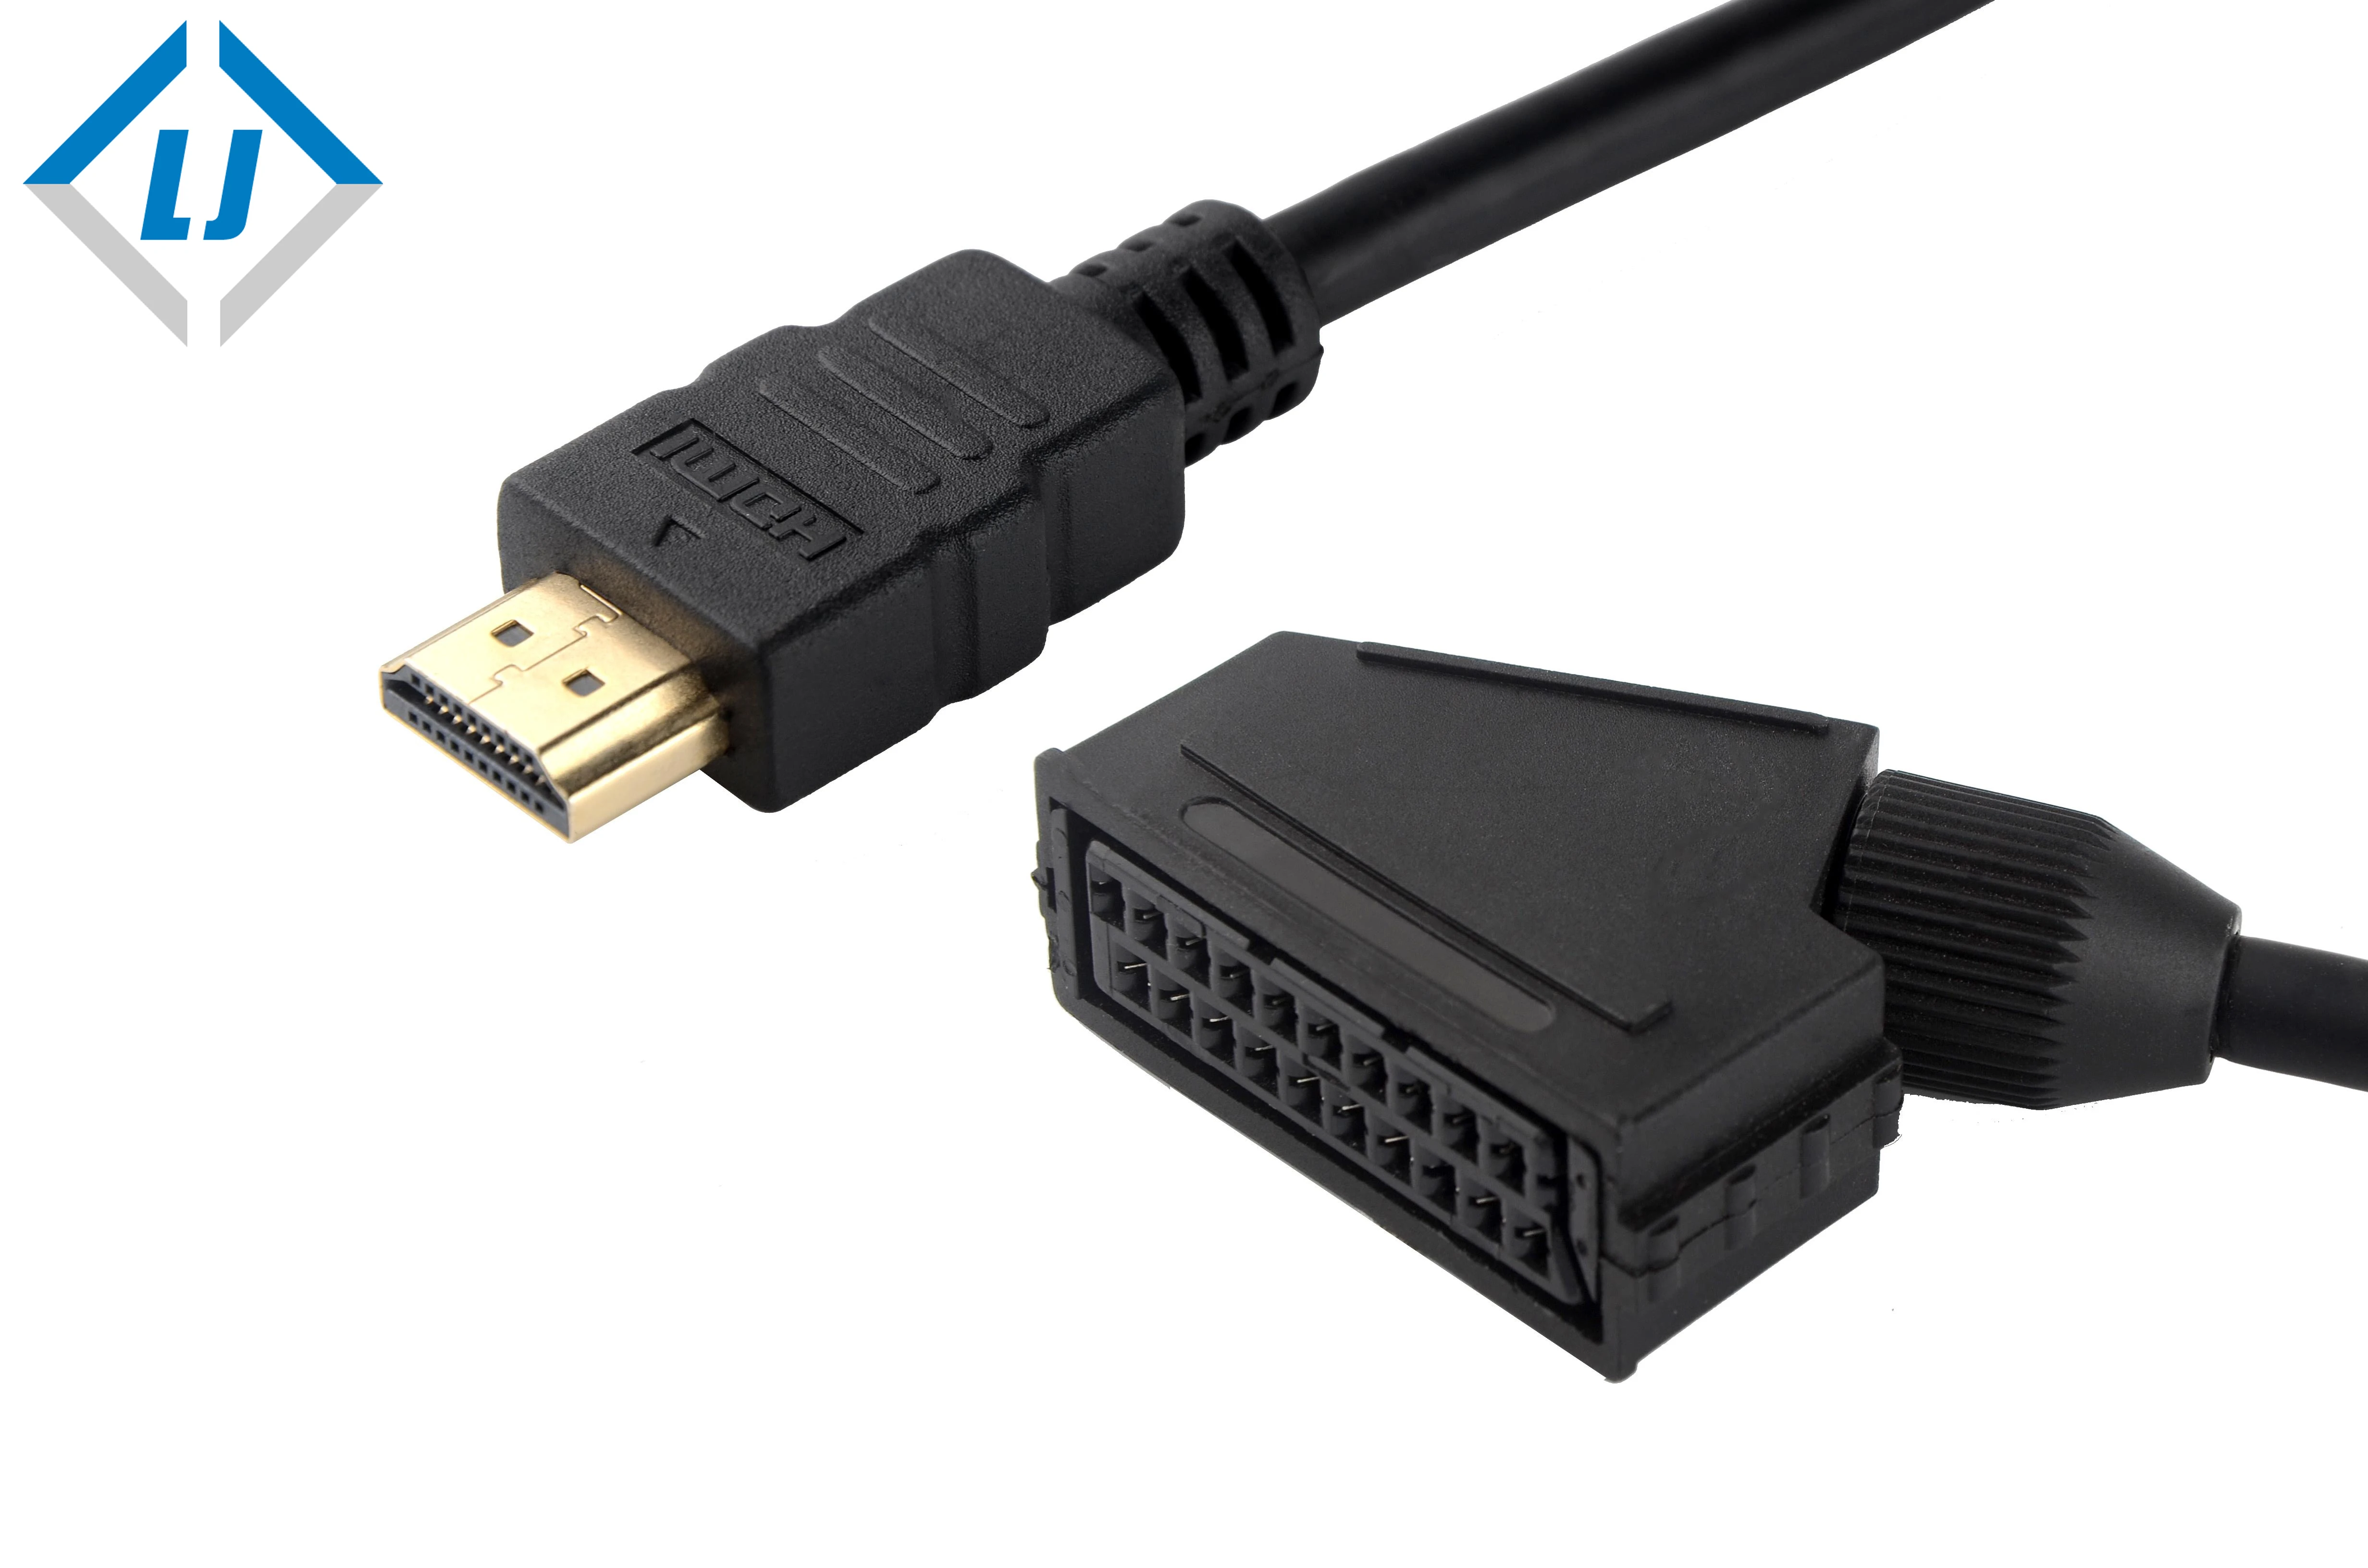 Masaccio Afskrække spøgelse Wholesale LJ Hot sales HDMI to scart cable male to female support 1080P  Cable for DVD TV From m.alibaba.com